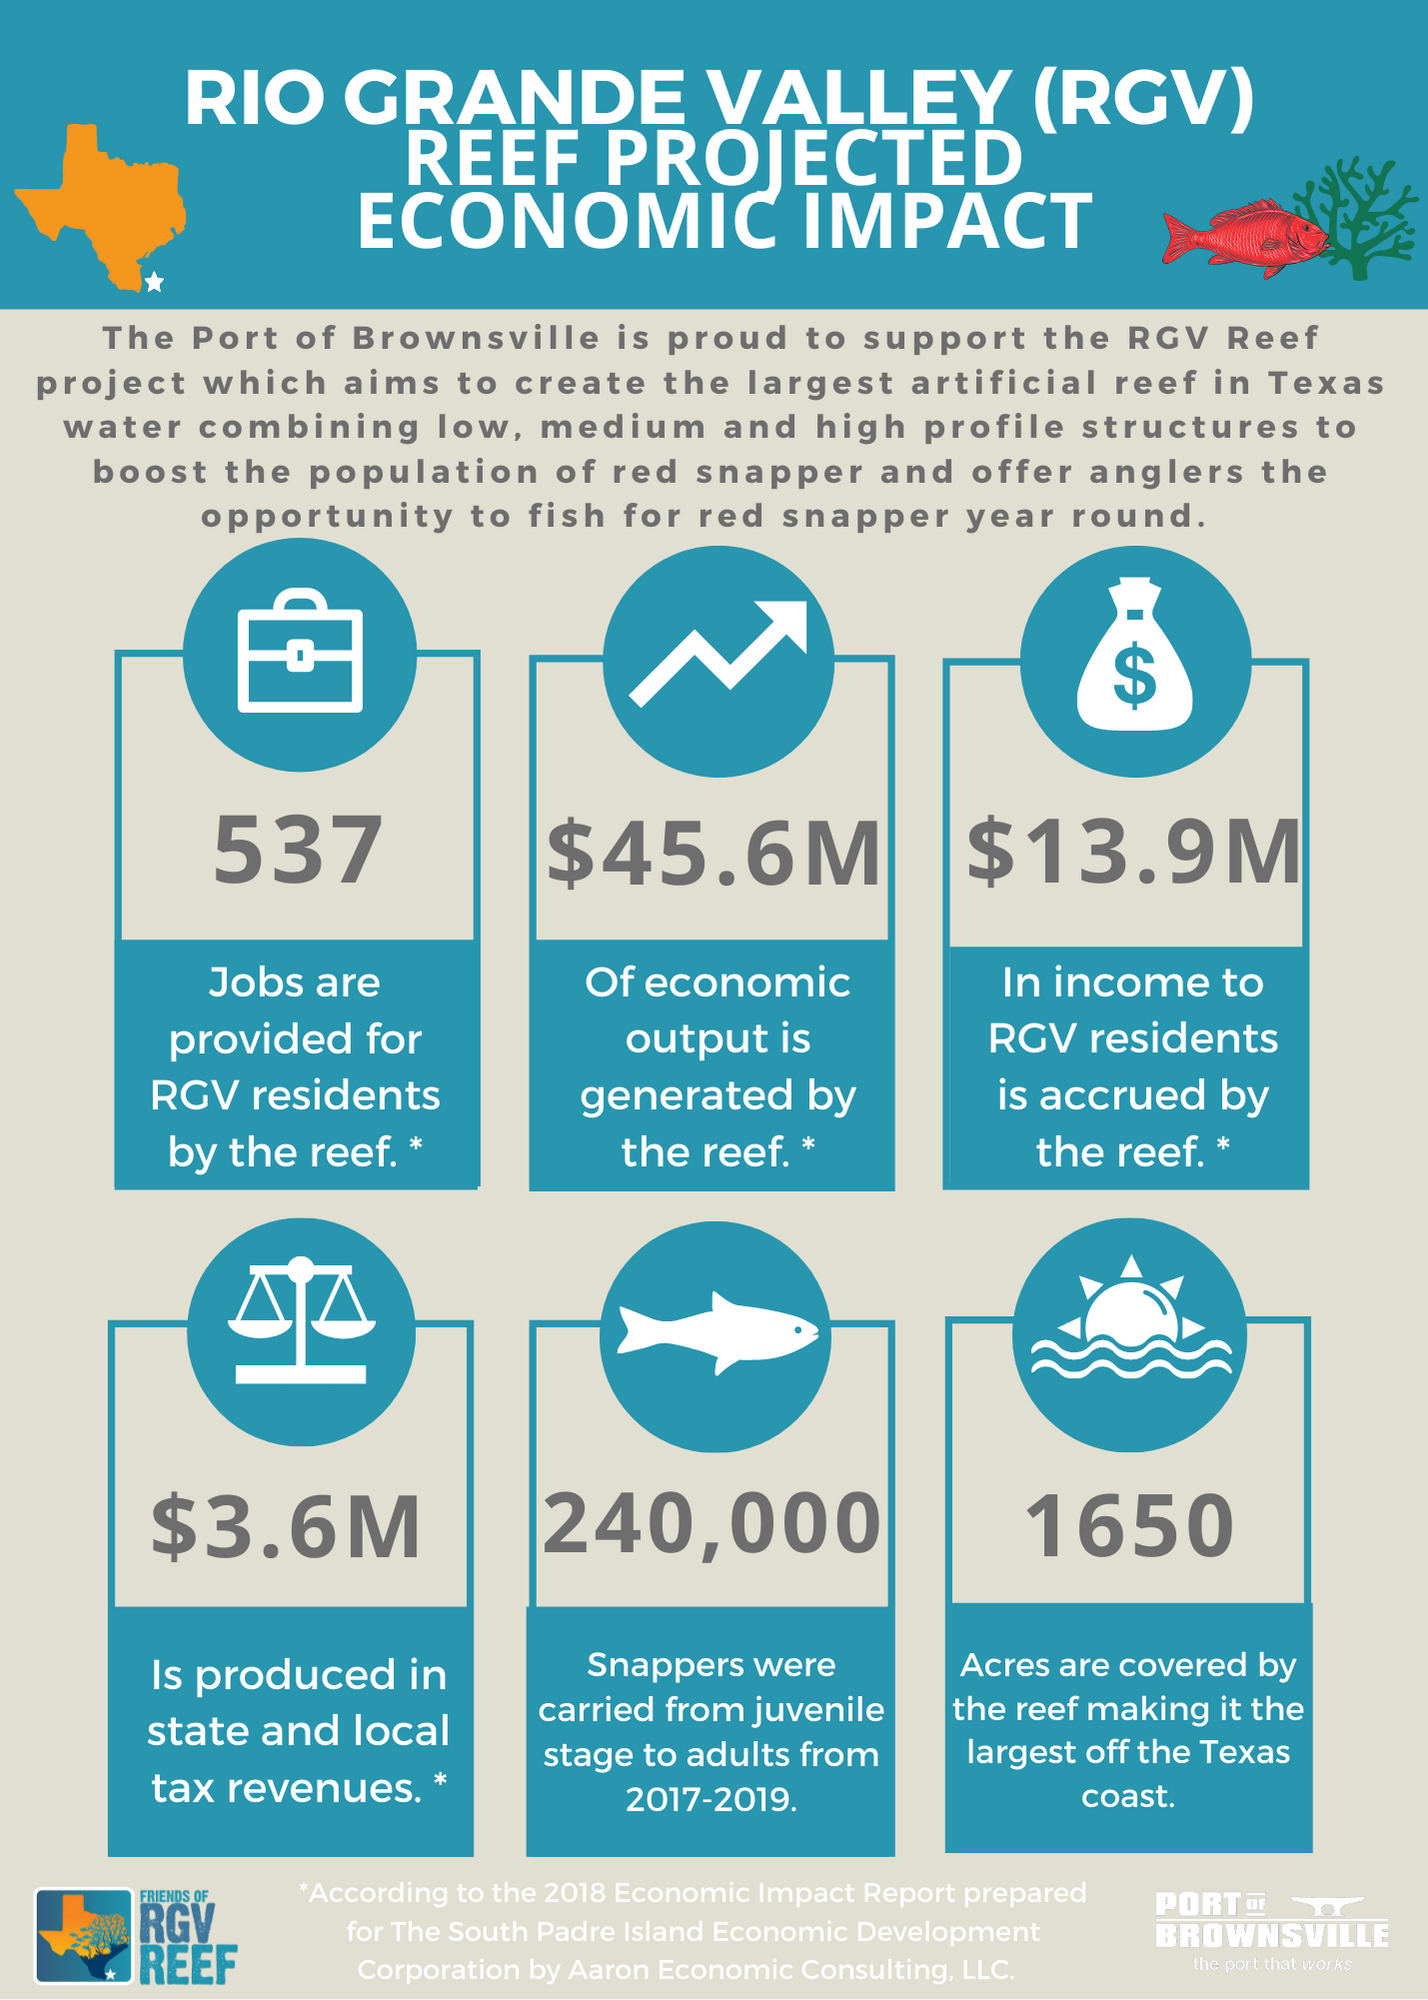 RGV Reef Project to Benefit Local Economy – Port of Brownsville